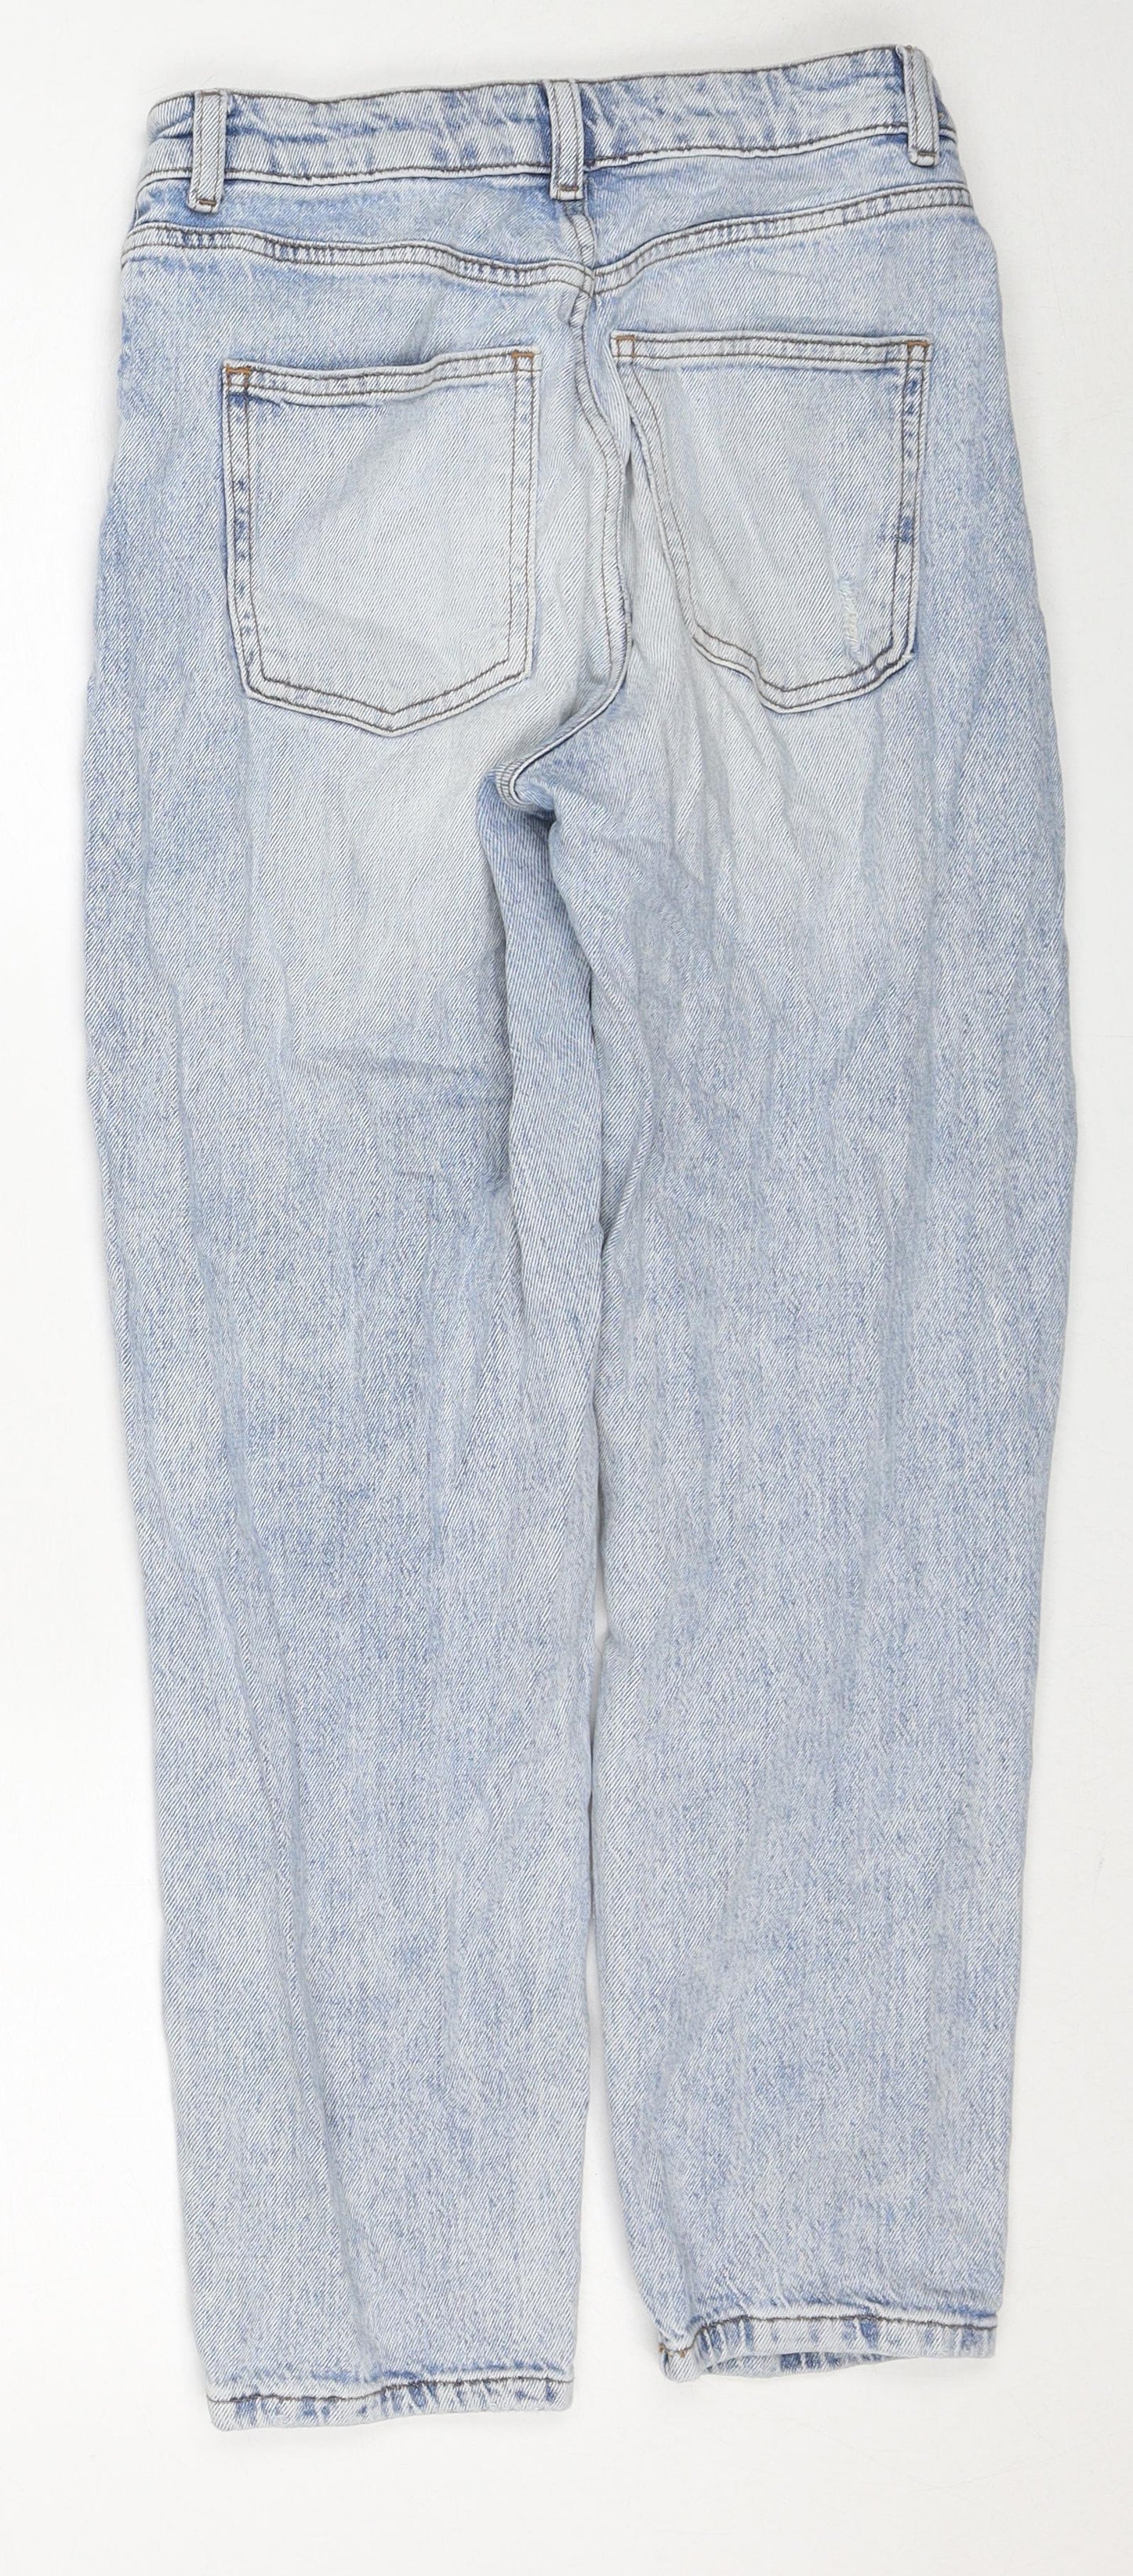 New Look Womens Blue Cotton Straight Jeans Size 8 Regular Zip